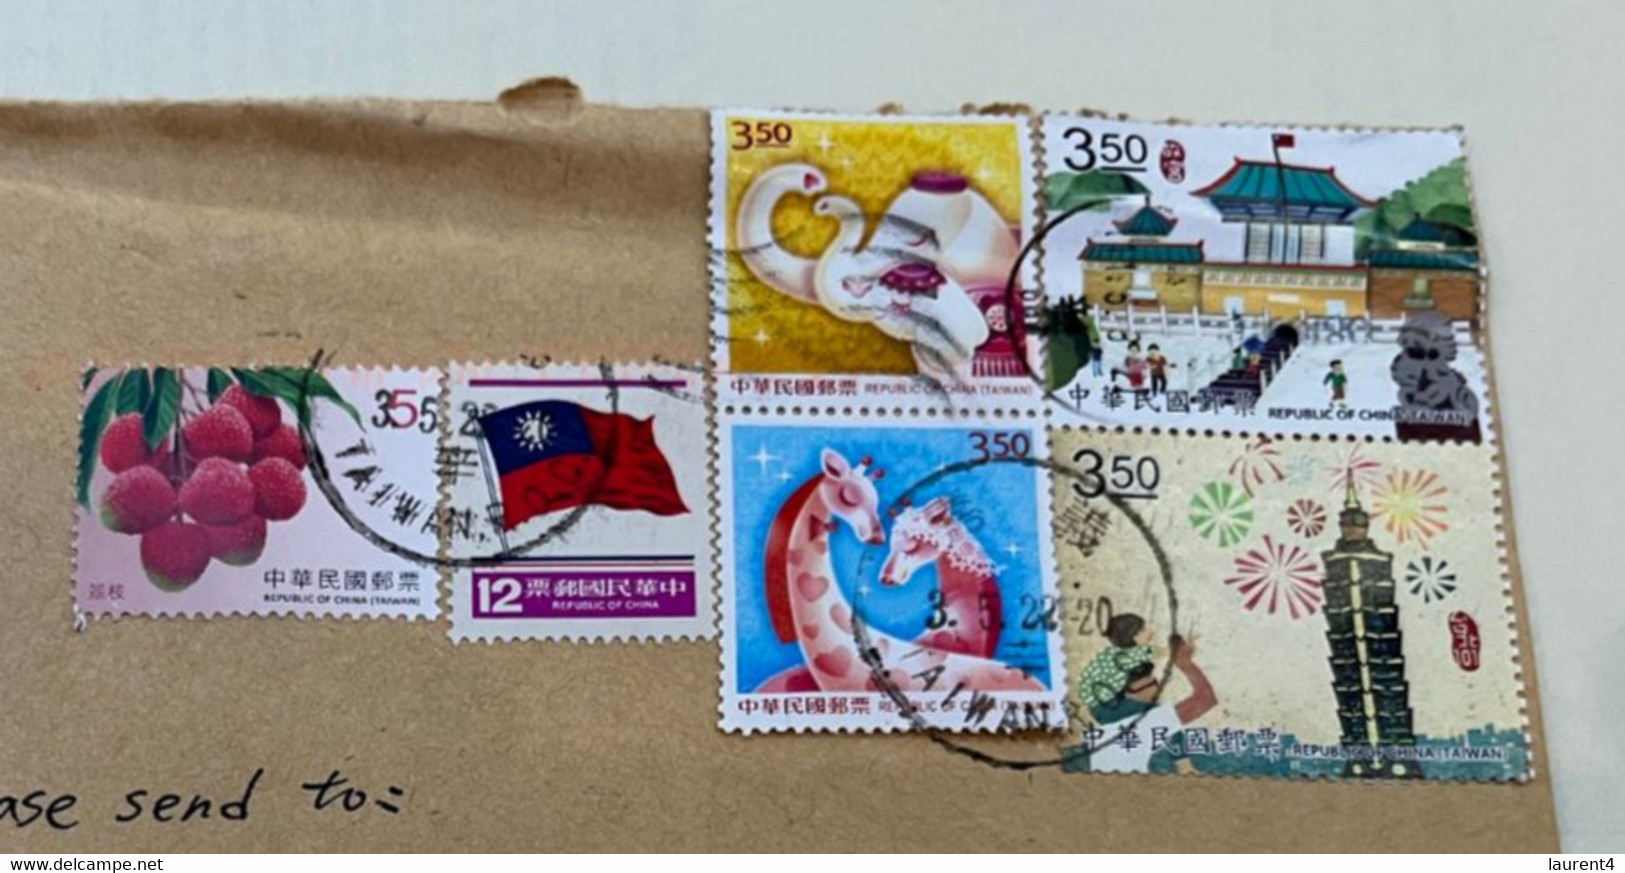 (1 L 7) Letter Posted From Taiwan To Australia (during COVID-19 Pandemic Crisis) 6 Stamps - 18 13,5 Cm - Briefe U. Dokumente